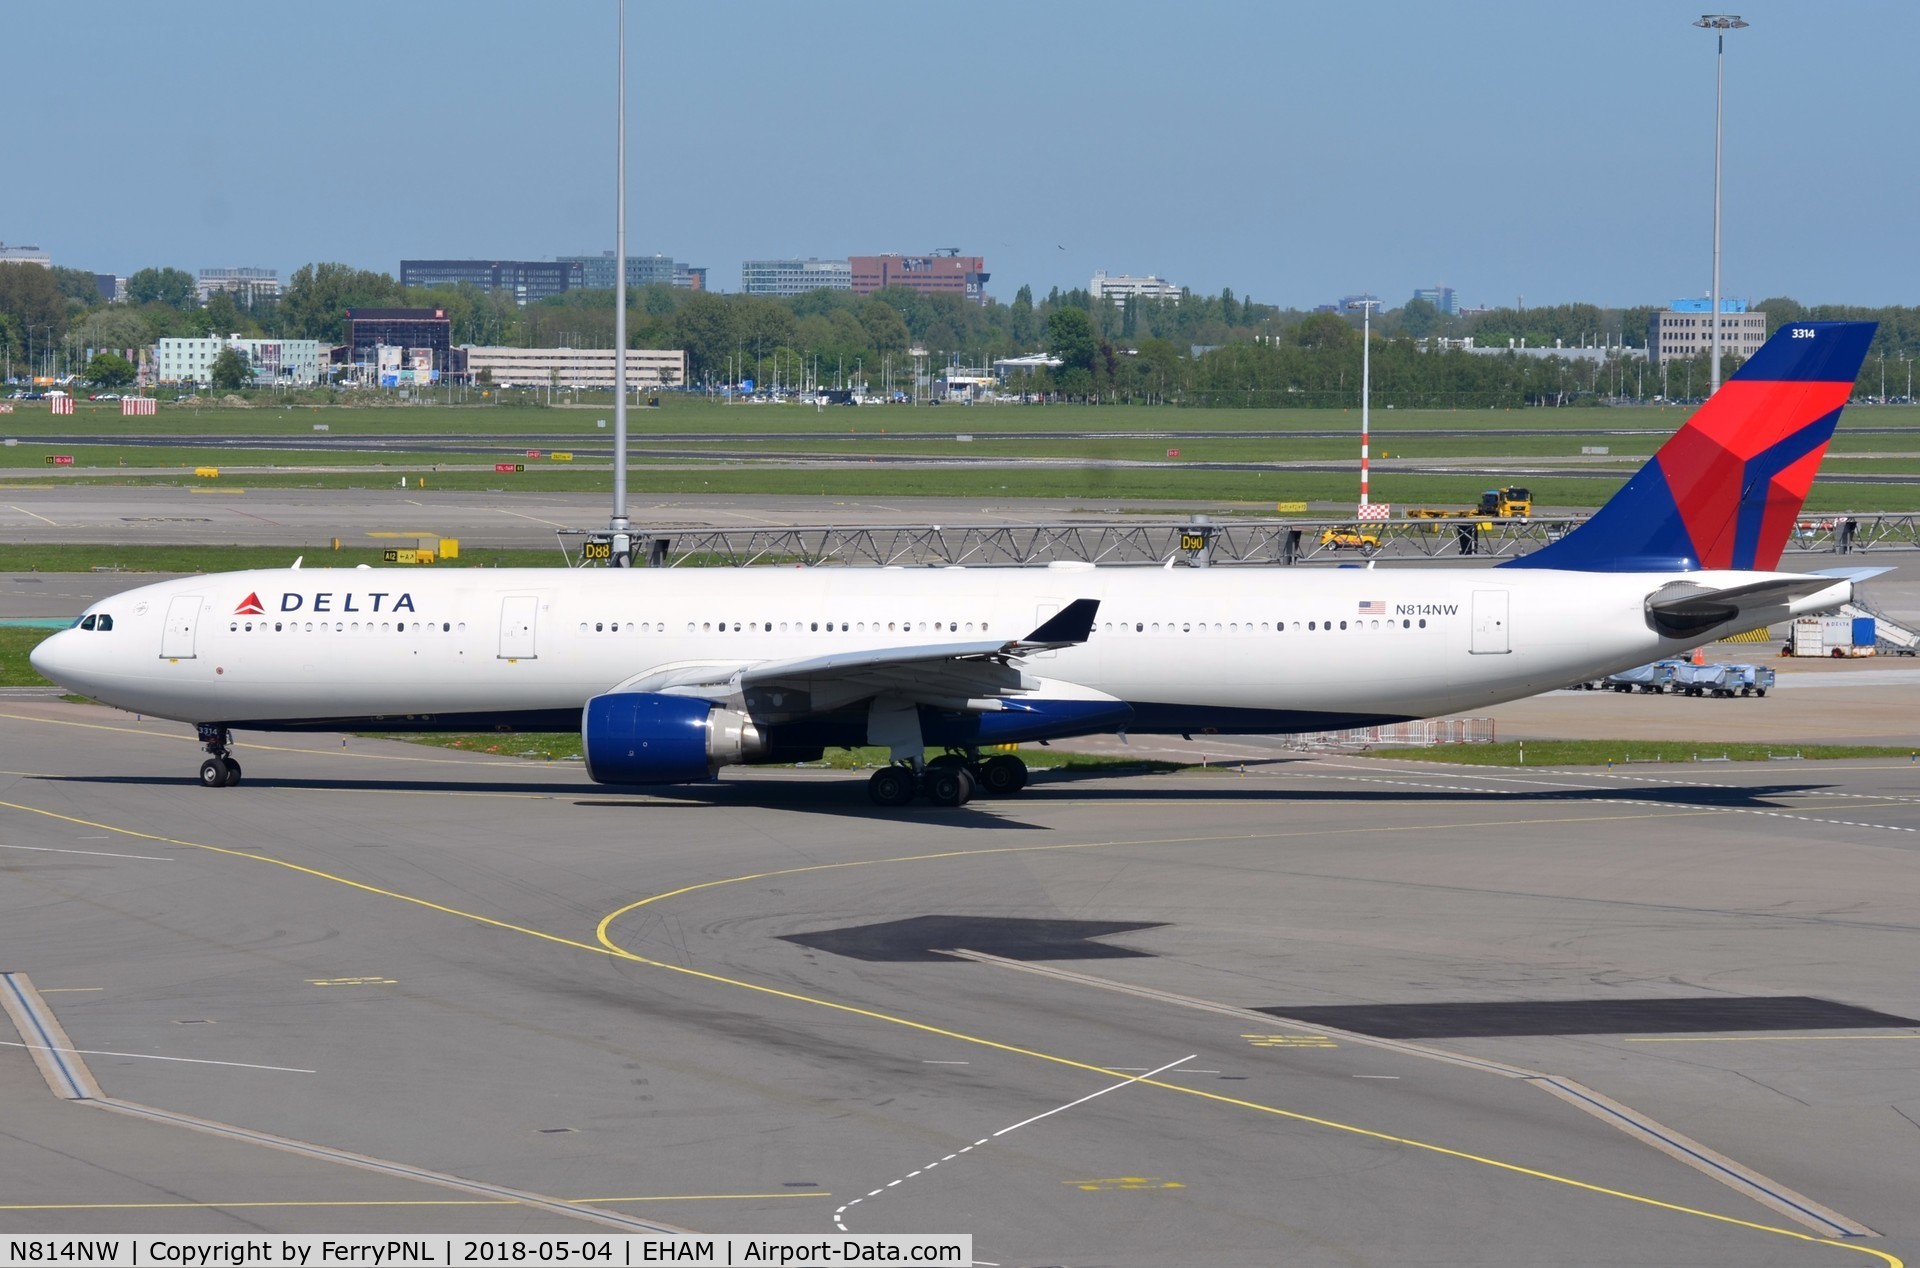 N814NW, 2006 Airbus A330-323 C/N 806, Delta A333 taxying for departure.